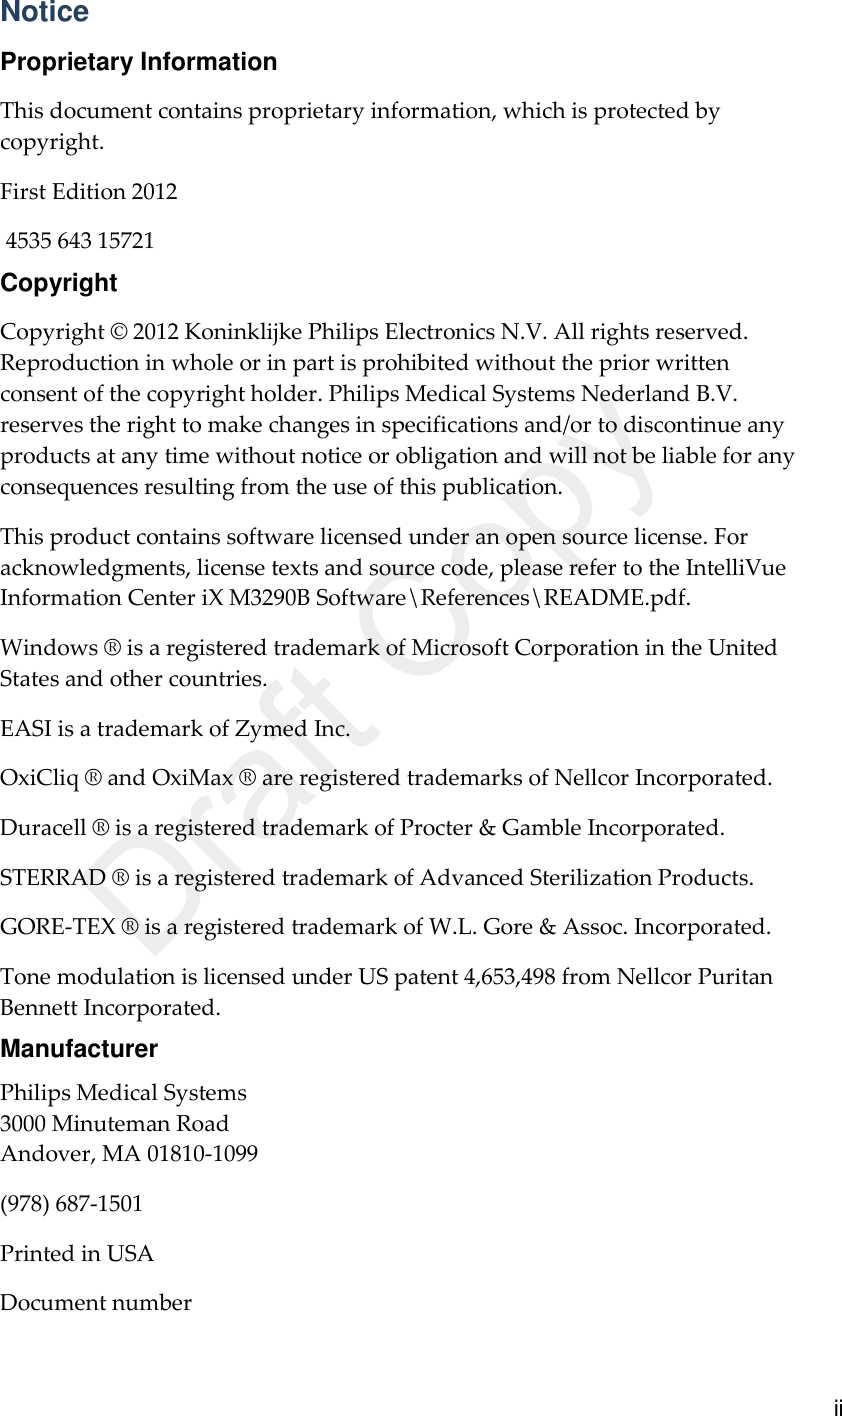      ii Notice Proprietary Information This document contains proprietary information, which is protected by copyright. First Edition 2012  4535 643 15721 Copyright Copyright © 2012 Koninklijke Philips Electronics N.V. All rights reserved. Reproduction in whole or in part is prohibited without the prior written consent of the copyright holder. Philips Medical Systems Nederland B.V. reserves the right to make changes in specifications and/or to discontinue any products at any time without notice or obligation and will not be liable for any consequences resulting from the use of this publication. This product contains software licensed under an open source license. For acknowledgments, license texts and source code, please refer to the IntelliVue Information Center iX M3290B Software\References\README.pdf. Windows ® is a registered trademark of Microsoft Corporation in the United States and other countries. EASI is a trademark of Zymed Inc. OxiCliq ® and OxiMax ® are registered trademarks of Nellcor Incorporated.   Duracell ® is a registered trademark of Procter &amp; Gamble Incorporated.   STERRAD ® is a registered trademark of Advanced Sterilization Products. GORE-TEX ® is a registered trademark of W.L. Gore &amp; Assoc. Incorporated. Tone modulation is licensed under US patent 4,653,498 from Nellcor Puritan Bennett Incorporated. Manufacturer Philips Medical Systems 3000 Minuteman Road Andover, MA 01810-1099 (978) 687-1501 Printed in USA Document number Draft Copy